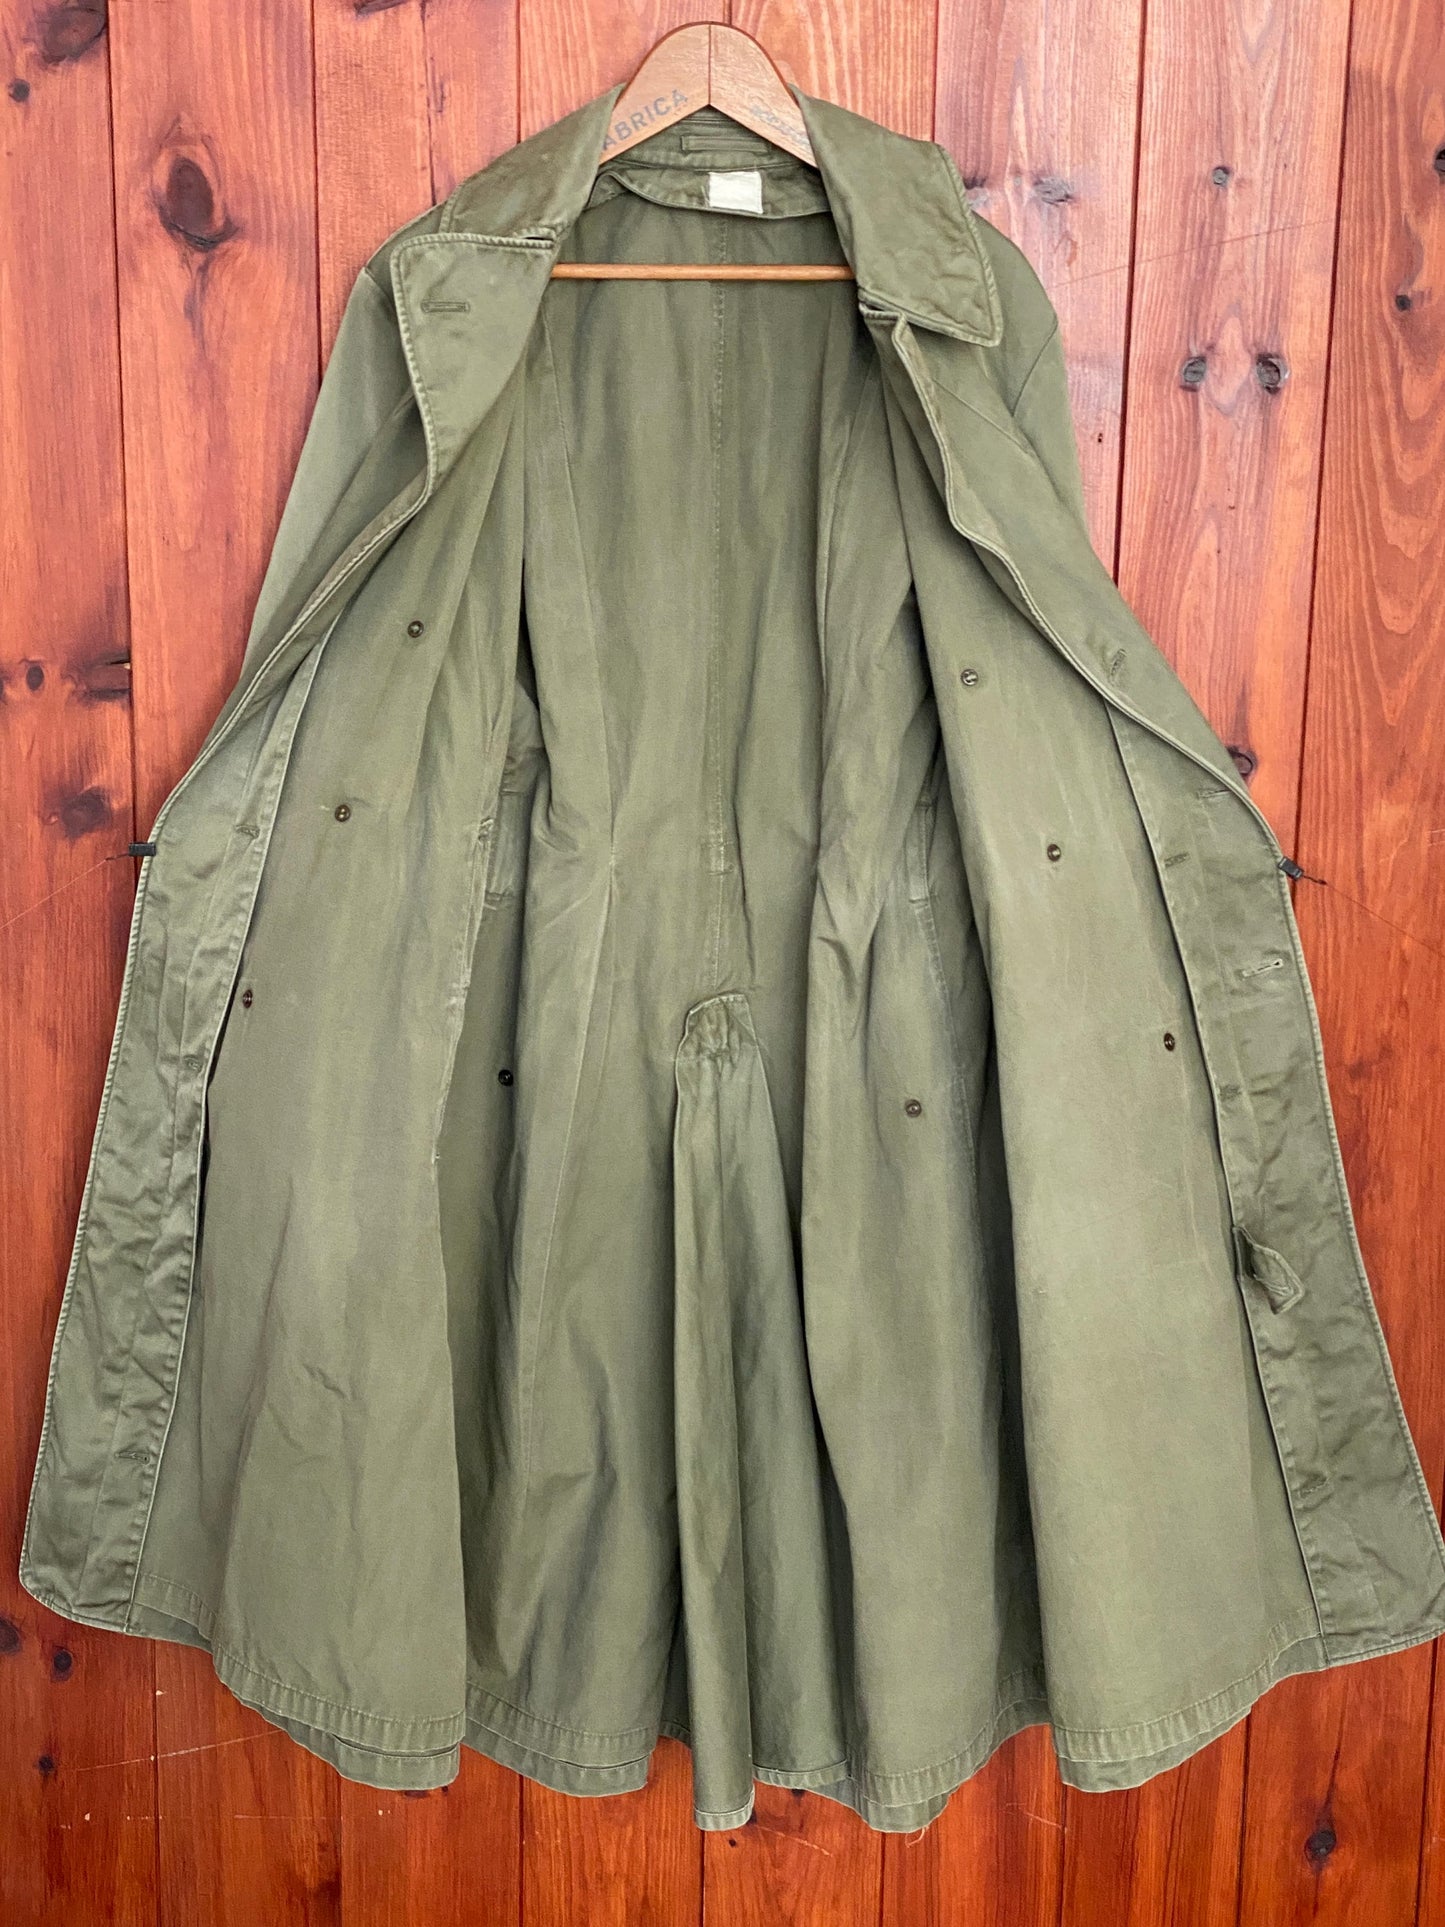 Original US Army 1950s Trench Coat: Authentic Military Vintage Apparel in Medium Regular Size. Embrace History and Style Today!